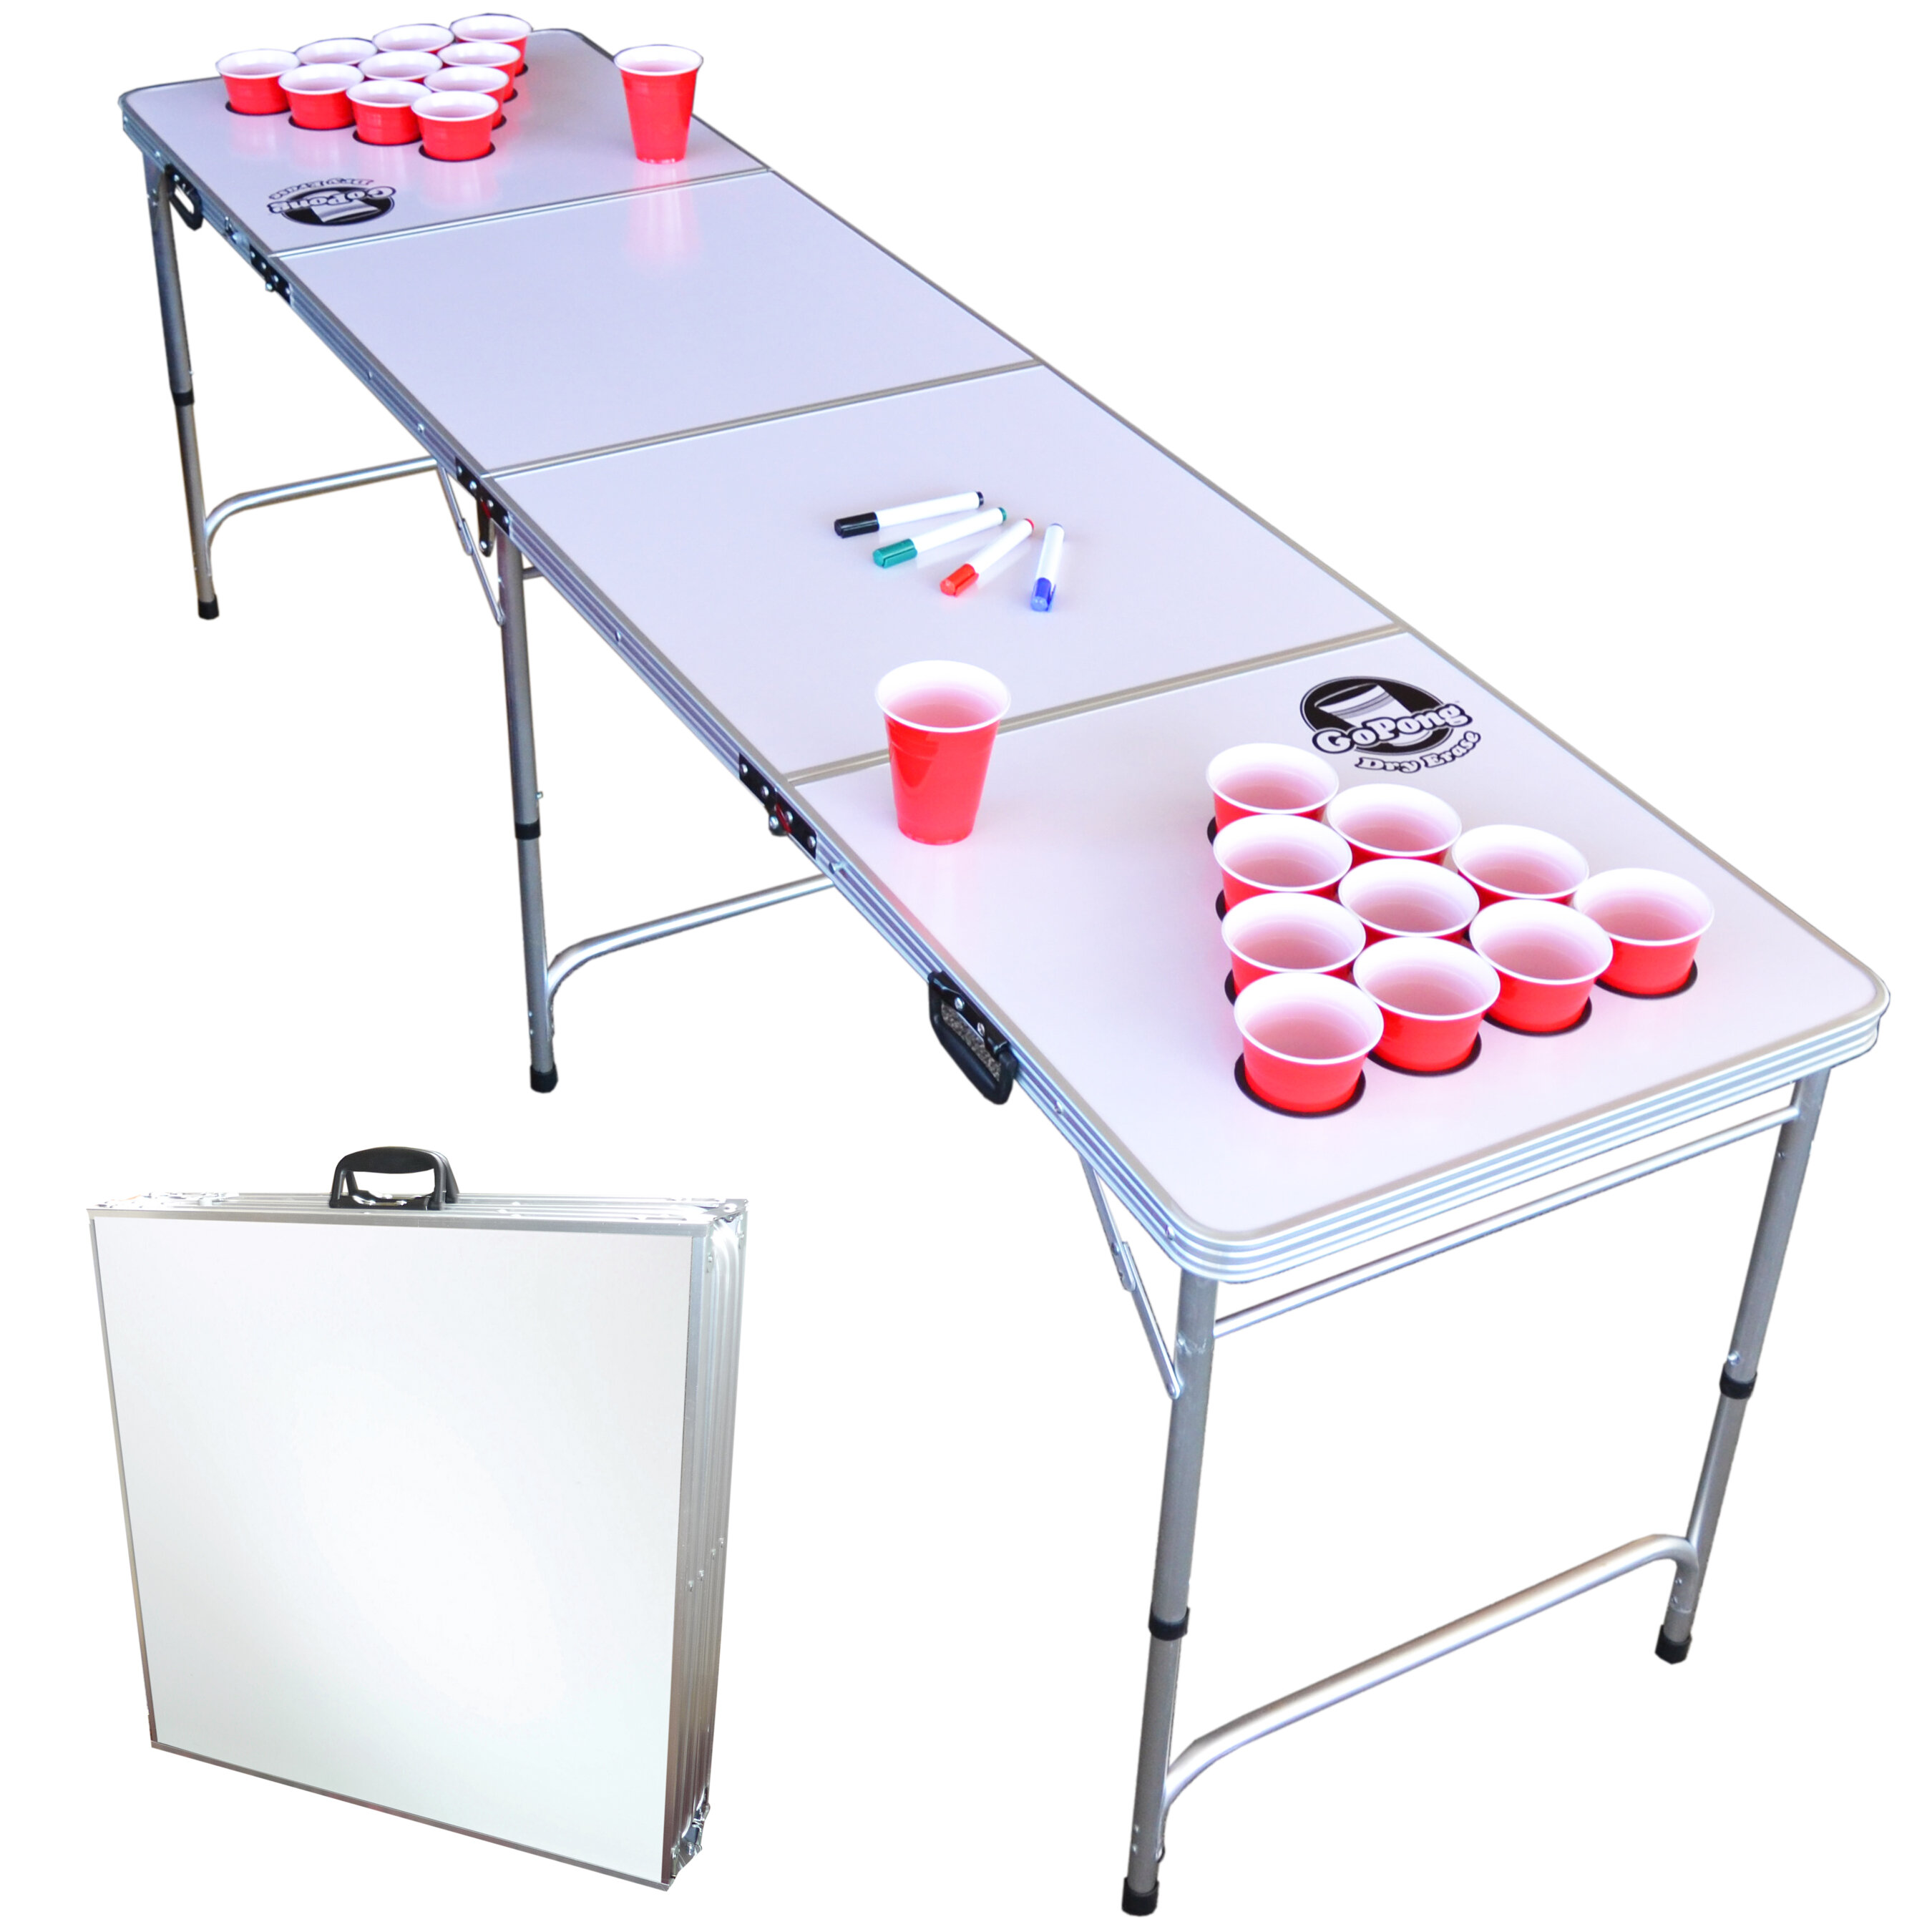 Beer pong table